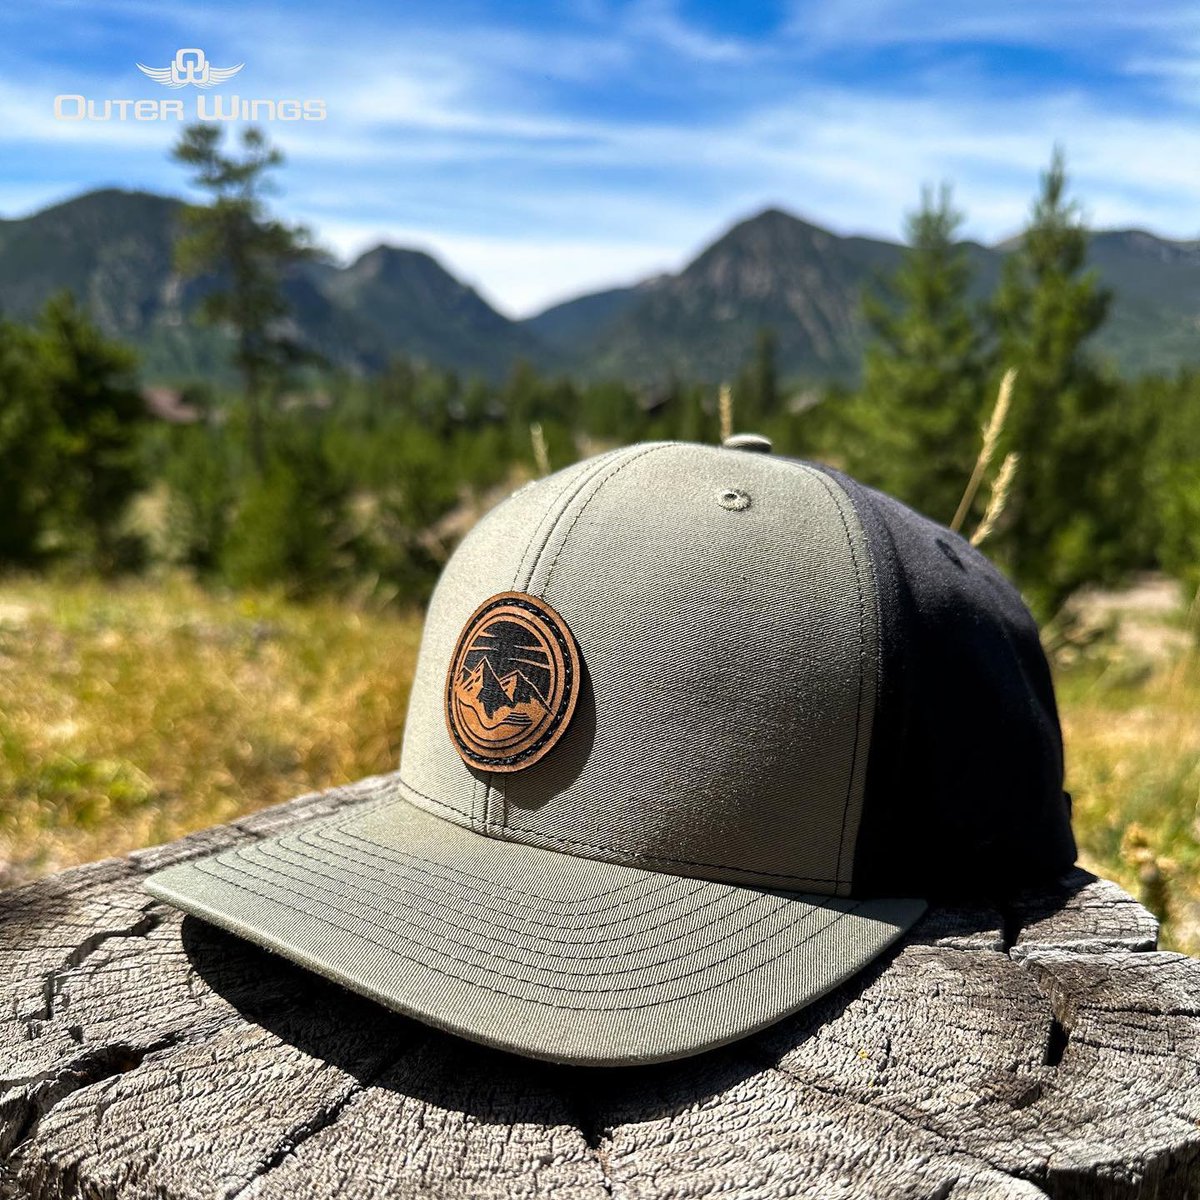 Fall Sale!! All hats are 20% off through next week in our Etsy shop!
OuterWings.Etsy.com

#customhats #leatherpatchhats #fallsale #20percentoff #richardsonhats #richardson #etsy #rockiemountains #headwear #apparel #customheadwear #customapparel #mountainlife   #leatherpatch